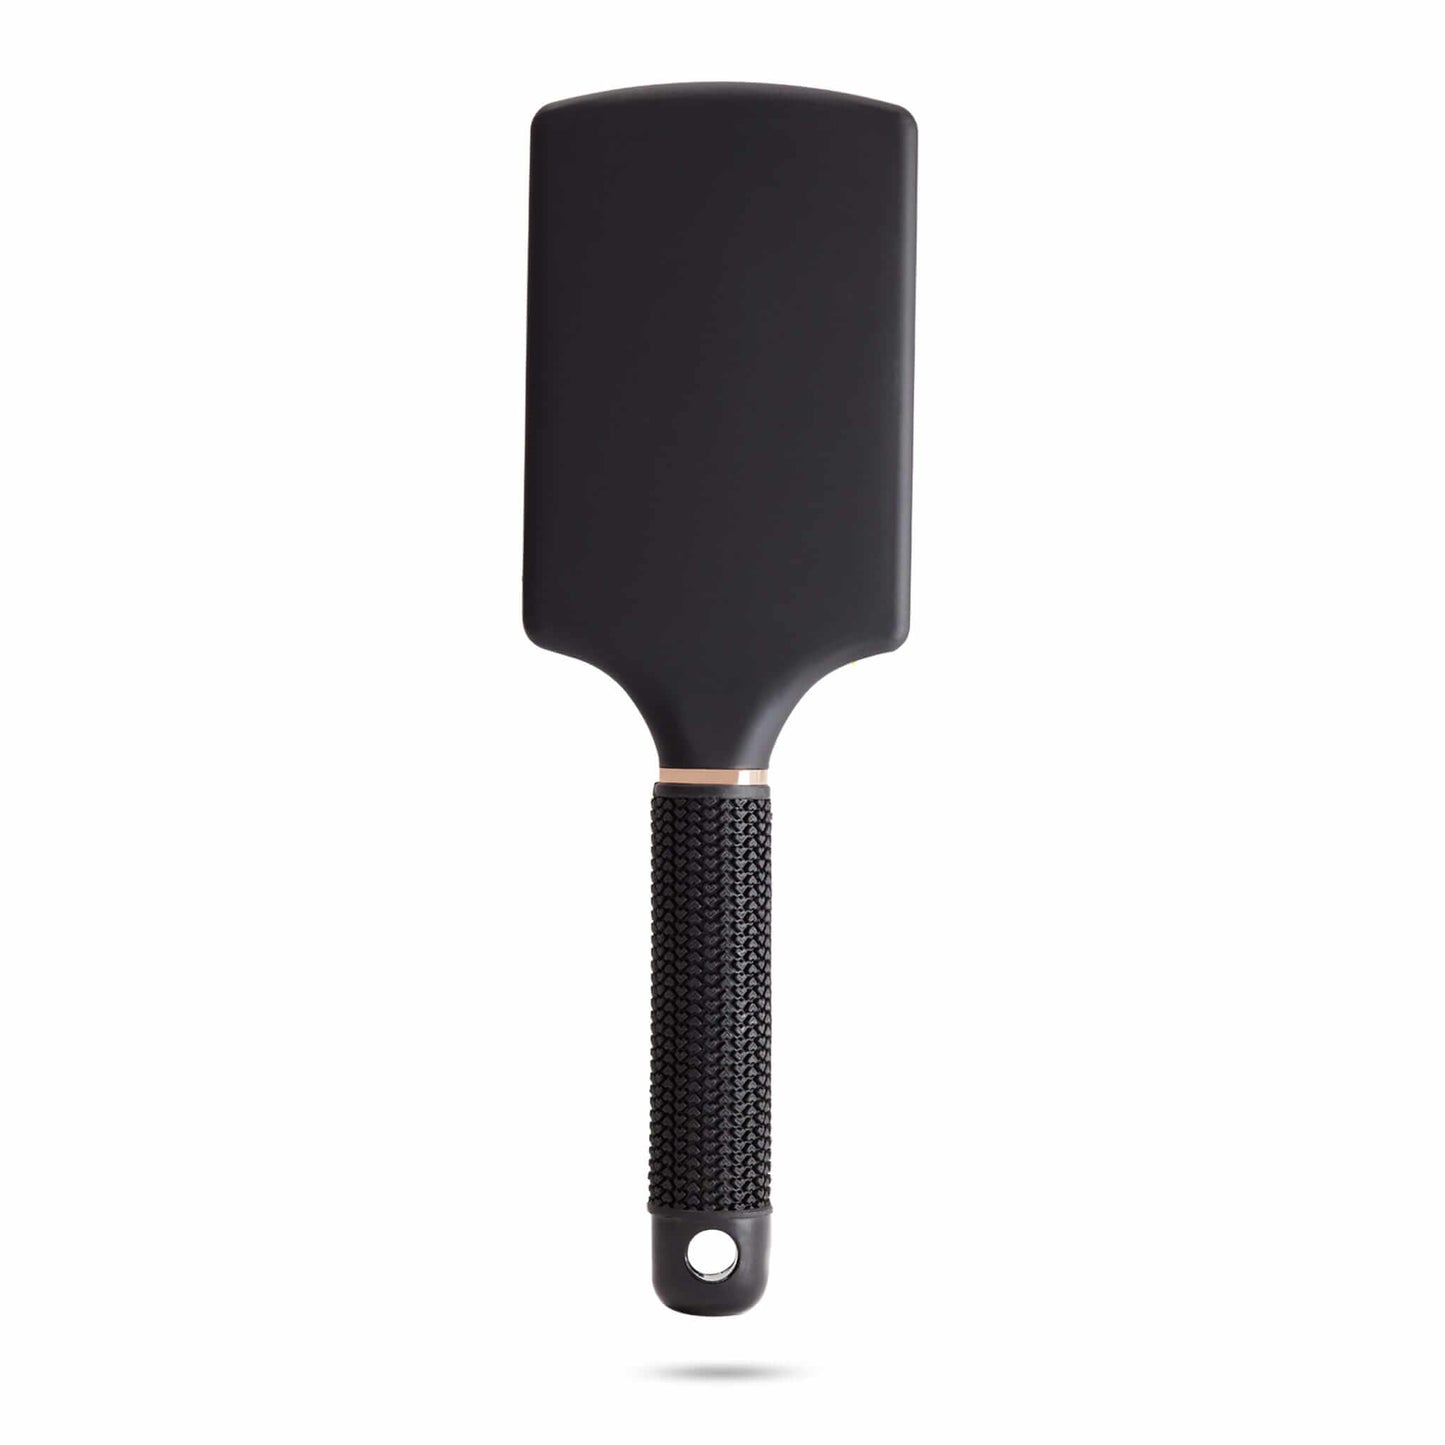 Quality black grip on the beautiful TYME Paddle Brush in obsidian color.